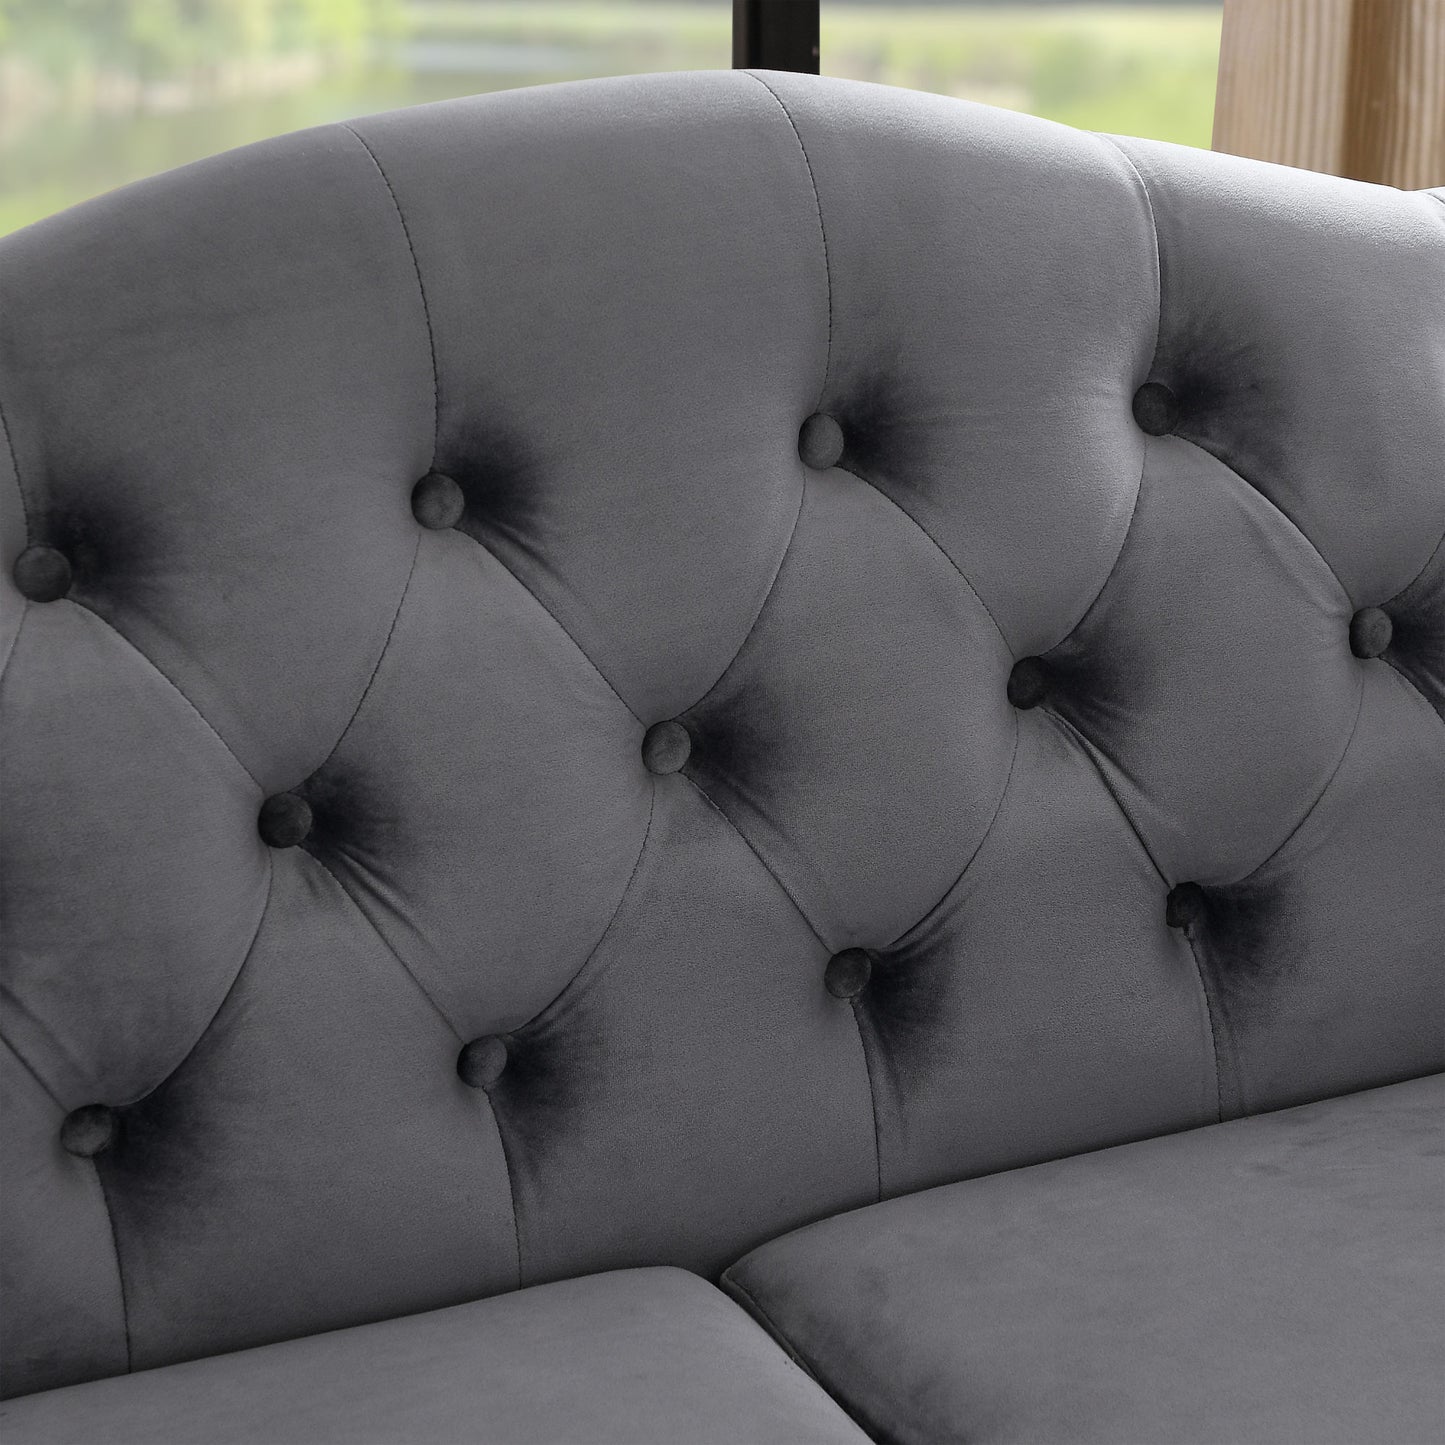 57" Chesterfield Sofa Grey Velvet for Living Room, 2 Seater Sofa Tufted Couch with Rolled Arms and Nailhead for Living Room, Bedroom, Office, Apartment, two pillows